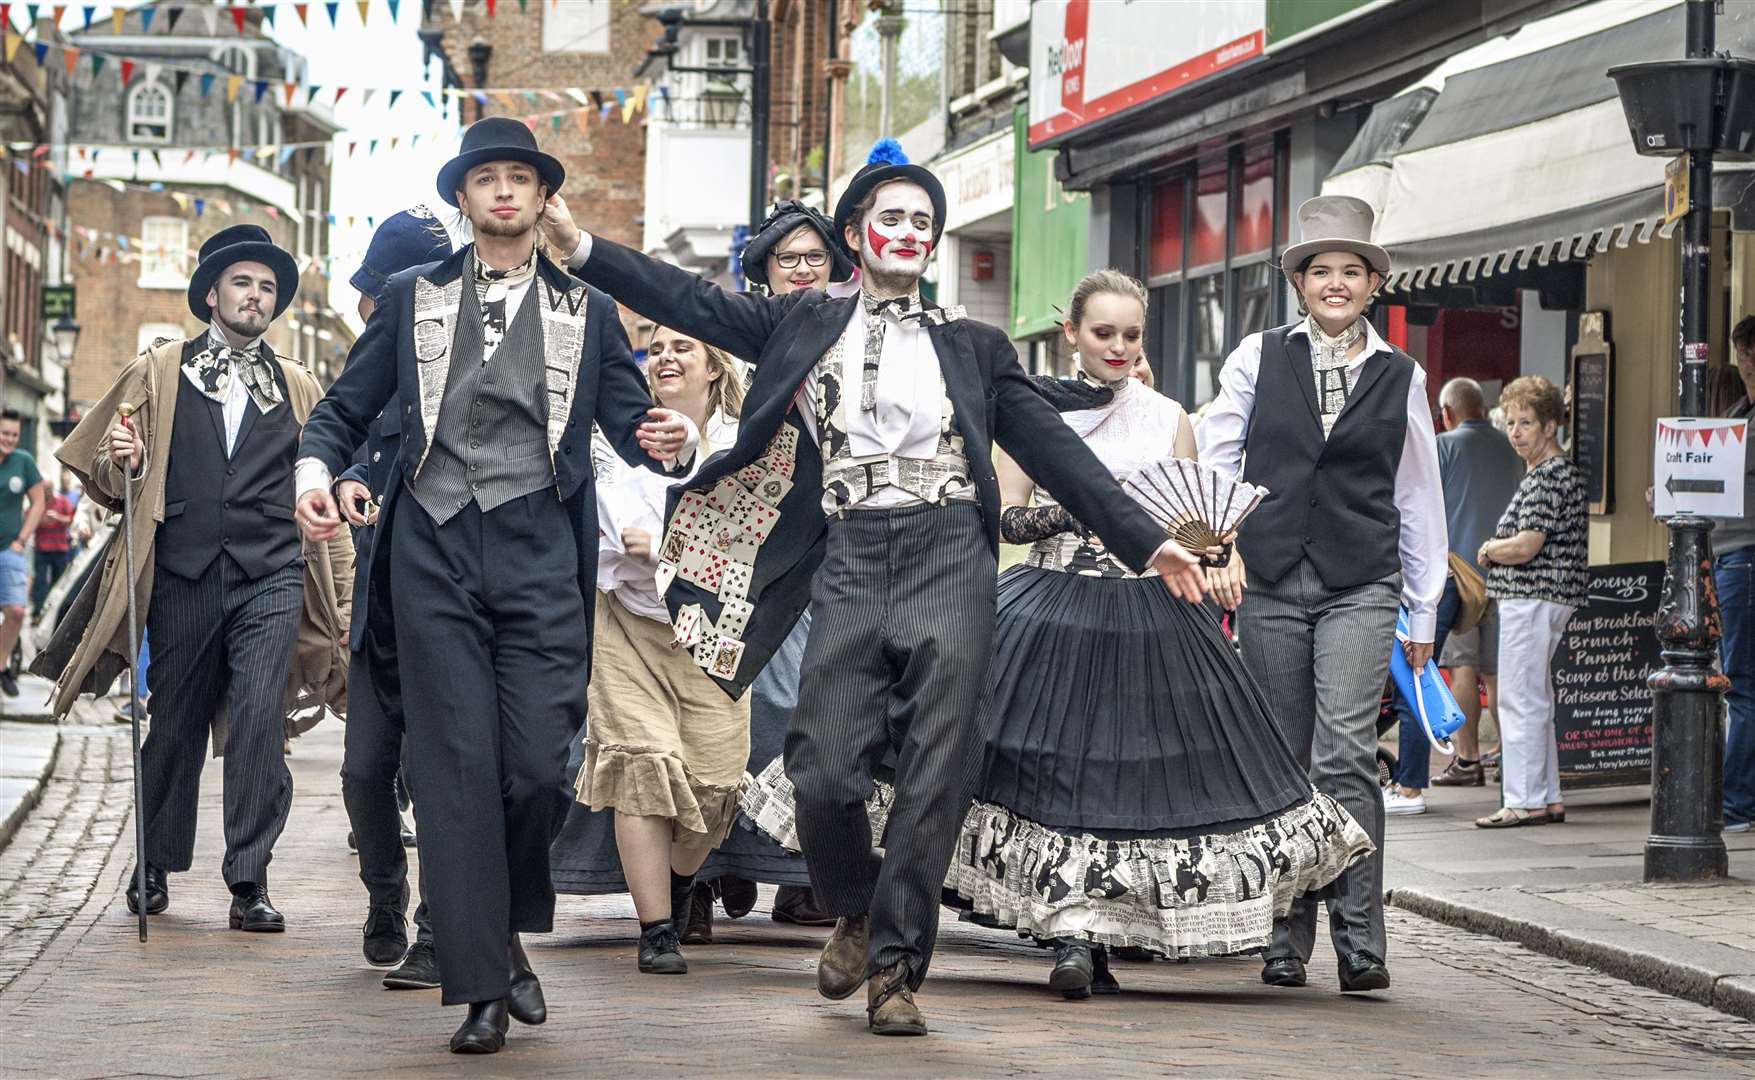 Dickensian characters will parade the streets